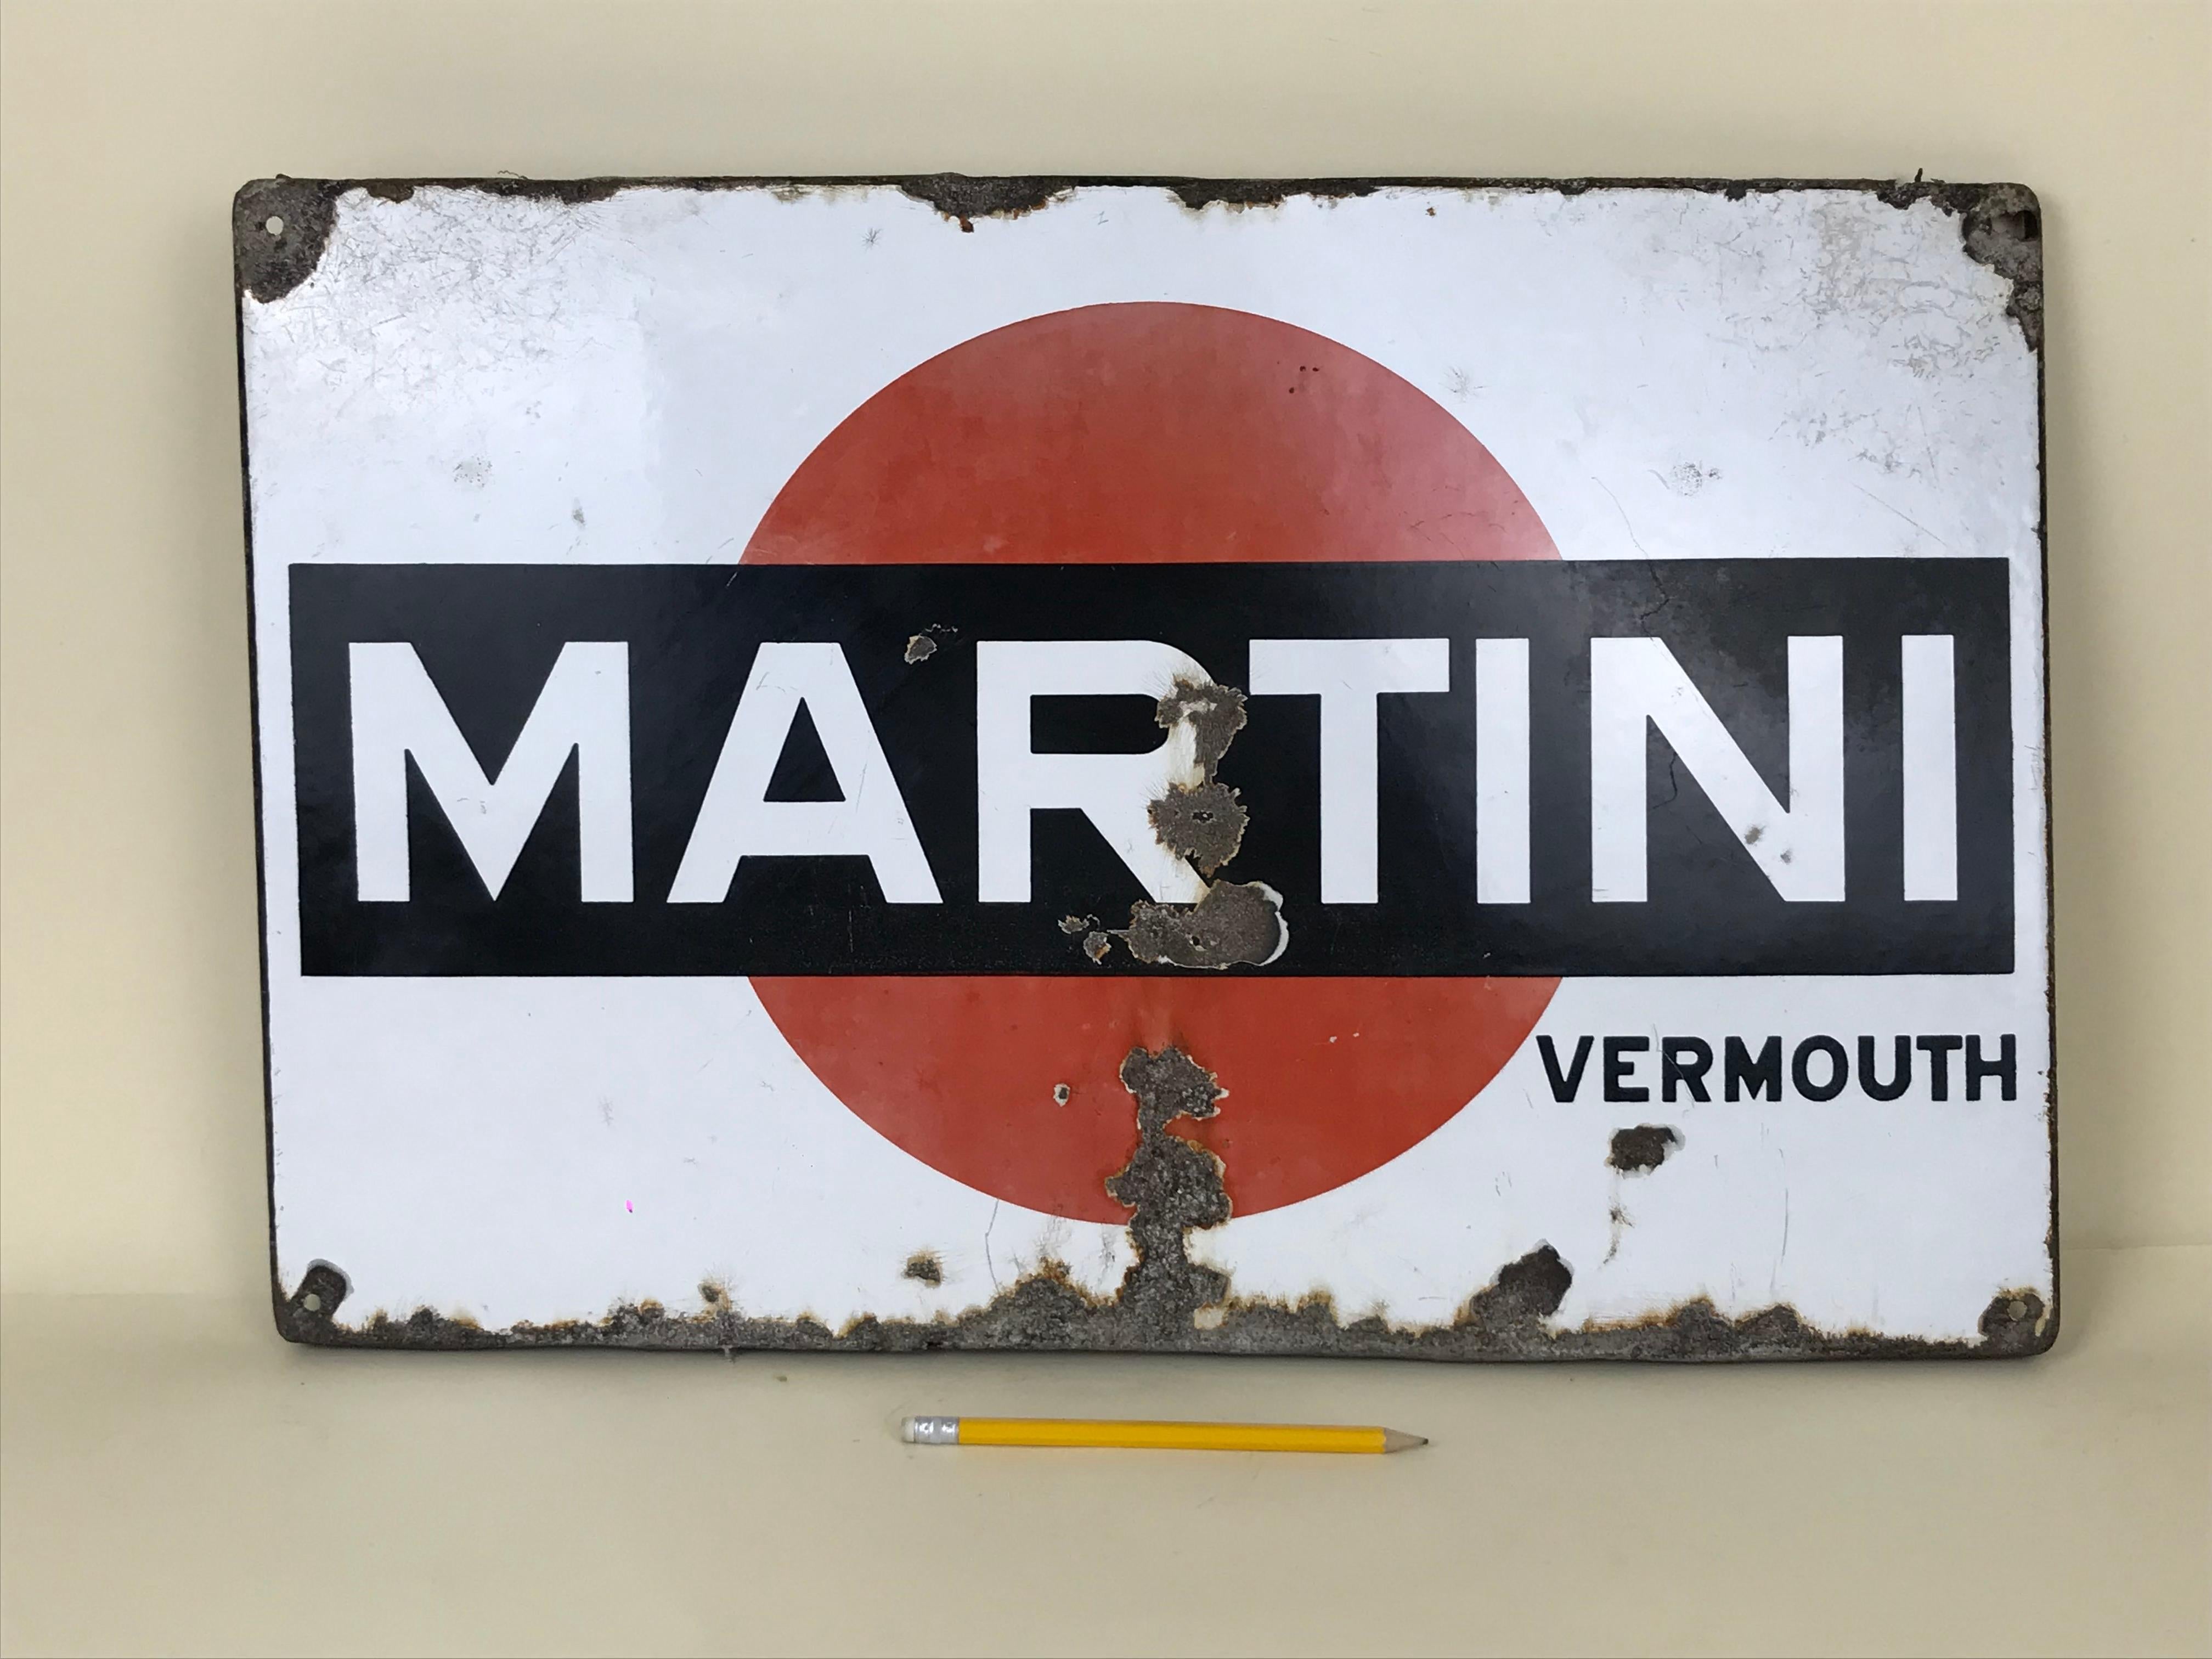 This enamel metal sign of Martini Vermouth was produced in the 1950s in Italy. In this advertising sign the Martini logo is placed on white background.

Collector's note:

Martini is a brand of Italian vermouth, named after the Martini & Rossi